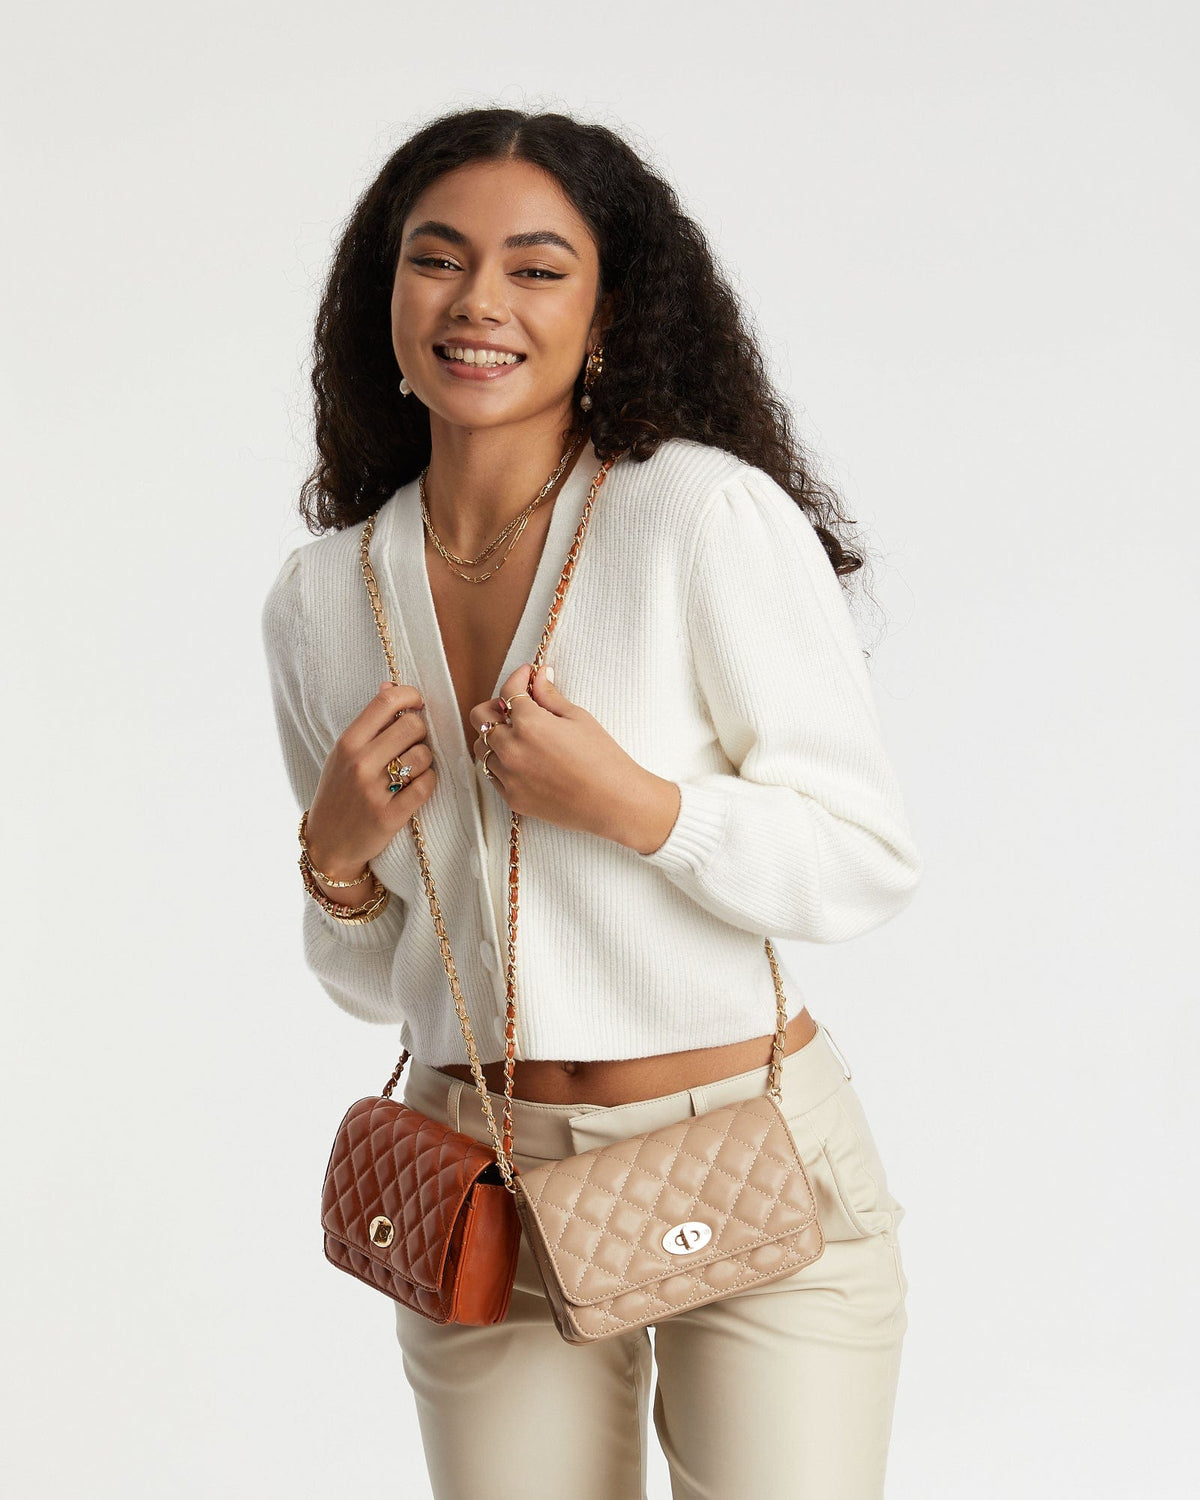 Are you in the market to purchase an Nude Eboni Quilted Crossbody Bag  Colette by Colette Hayman ? Act now